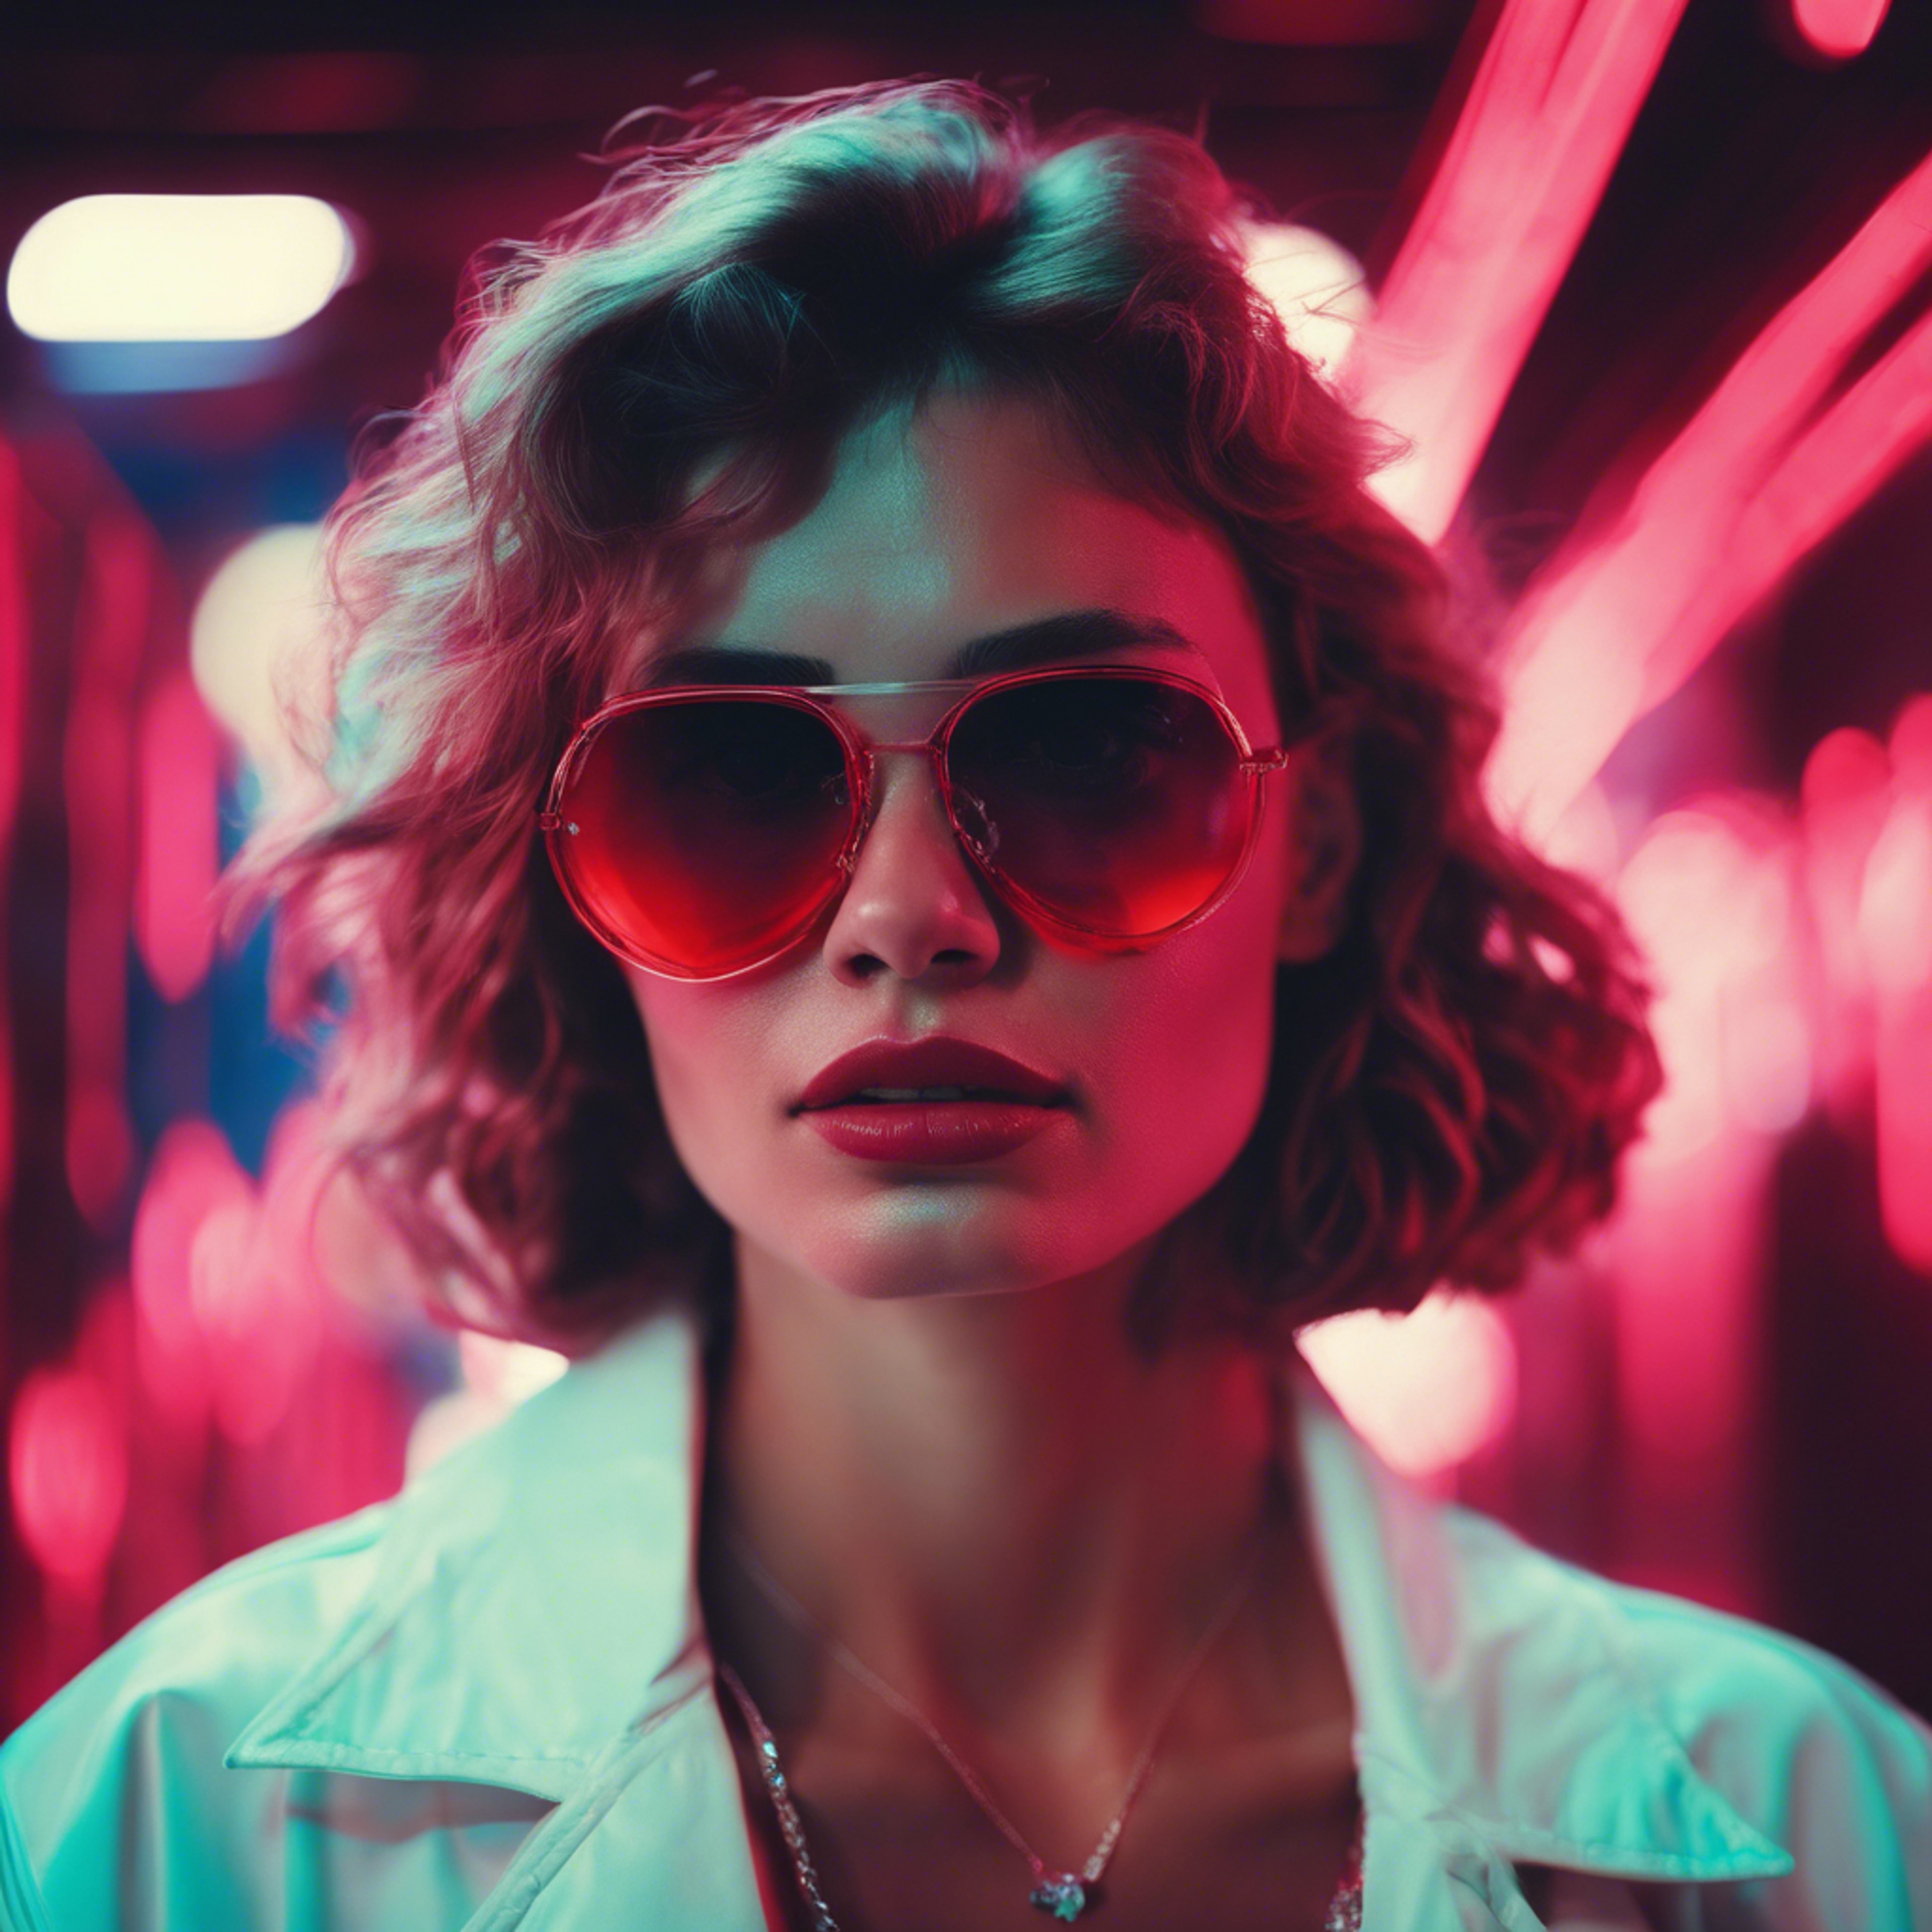 Retro 80's style portrait of a woman in sunglasses lit by cool red neon lights. Kertas dinding[9fb655559f07479e9c29]